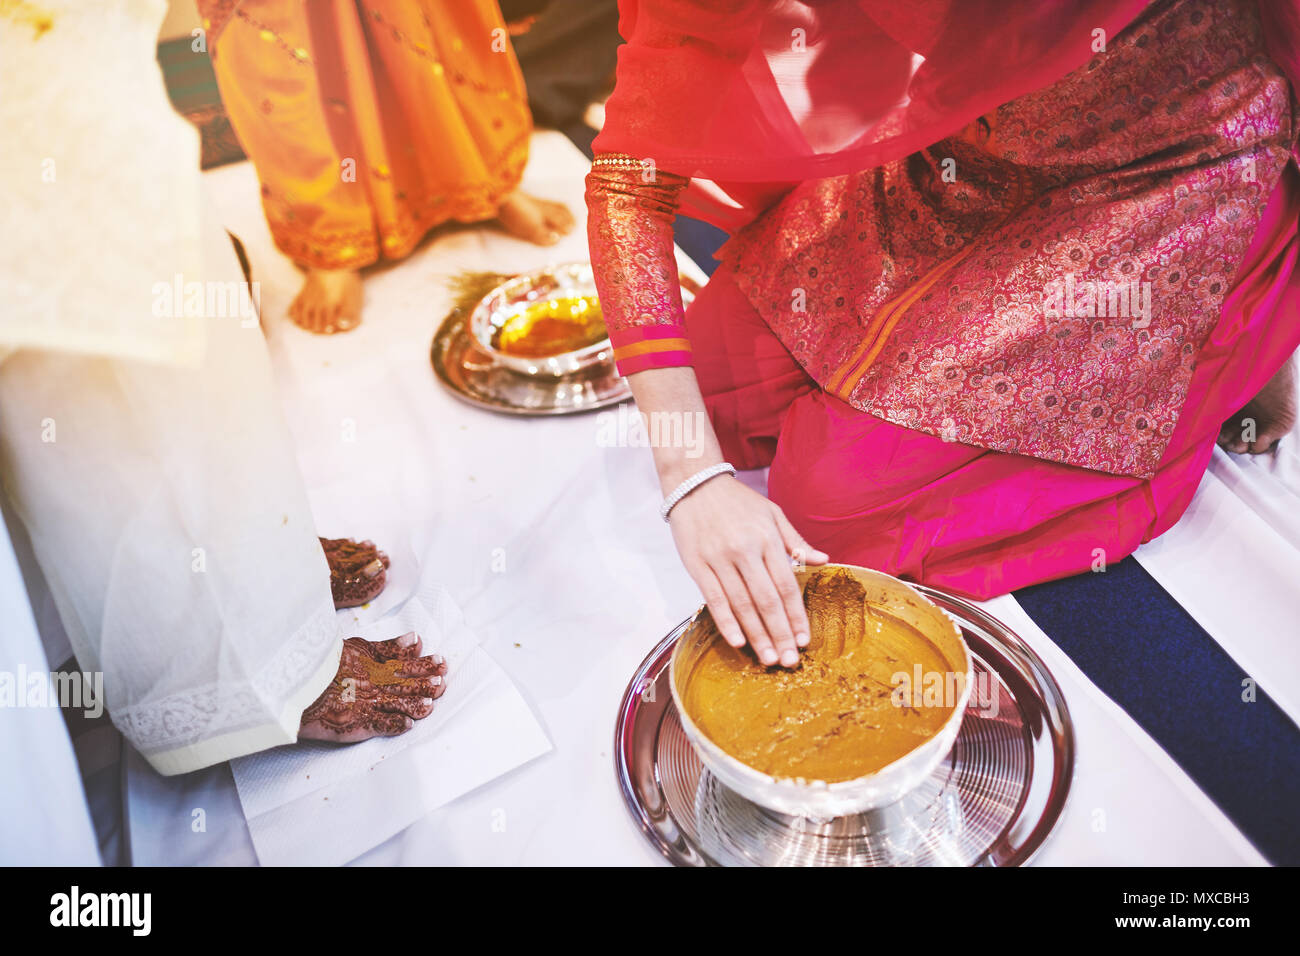 The bride standing on the white fabric and the women prepraing the turmeric (haldi) oil mixed with milk to pasting on the bride's feet and body, the t Stock Photo